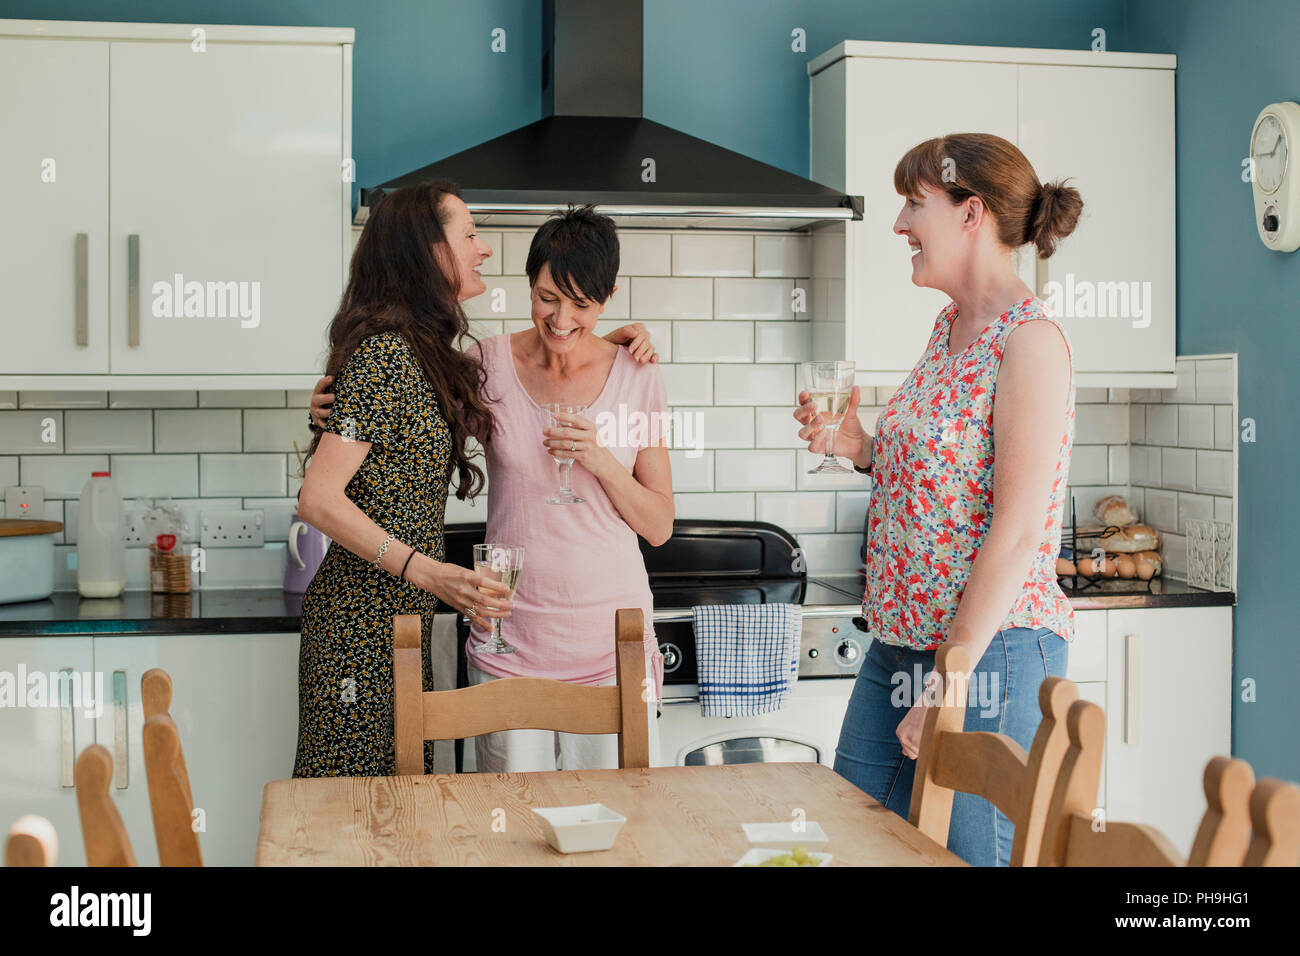 Three mid adult women standing in a kicthen enjoying a glass of wine. The women are all standing around the stove in the kitchen, talking and laughing Stock Photo